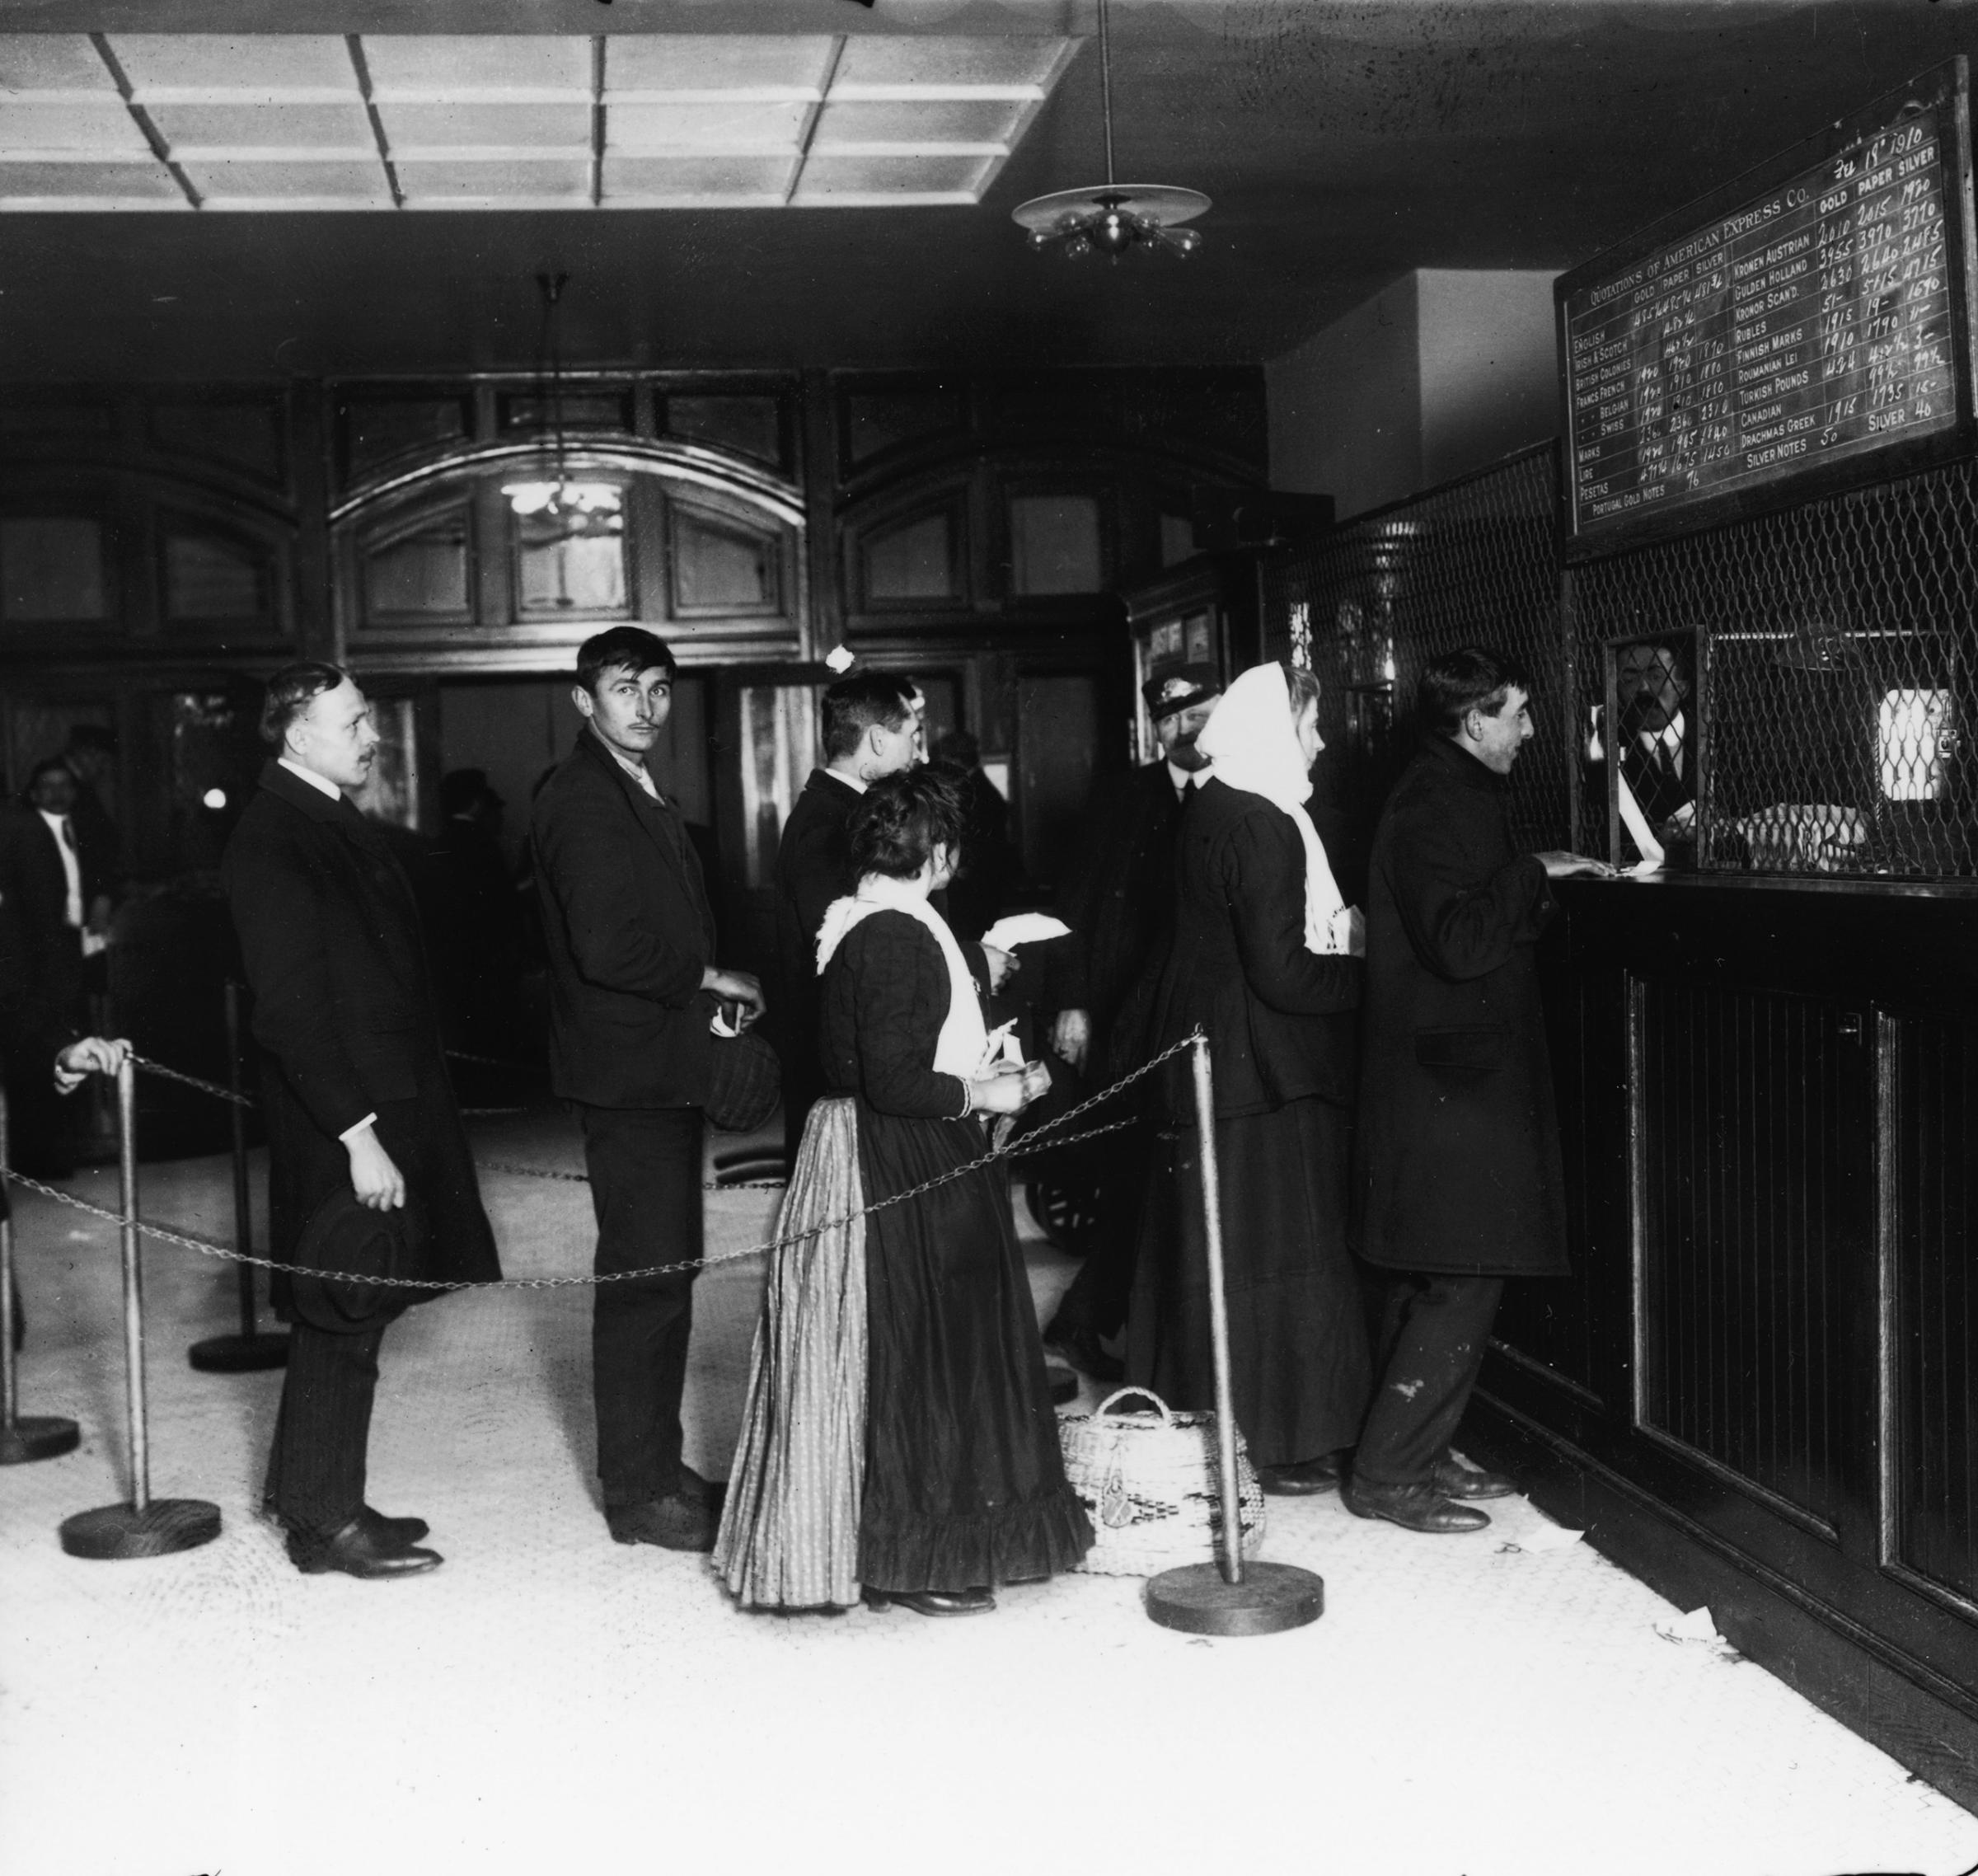 Customers wait in line at a teller's window at a bank on Ellis Island, New York, Feb. 18, 1910.